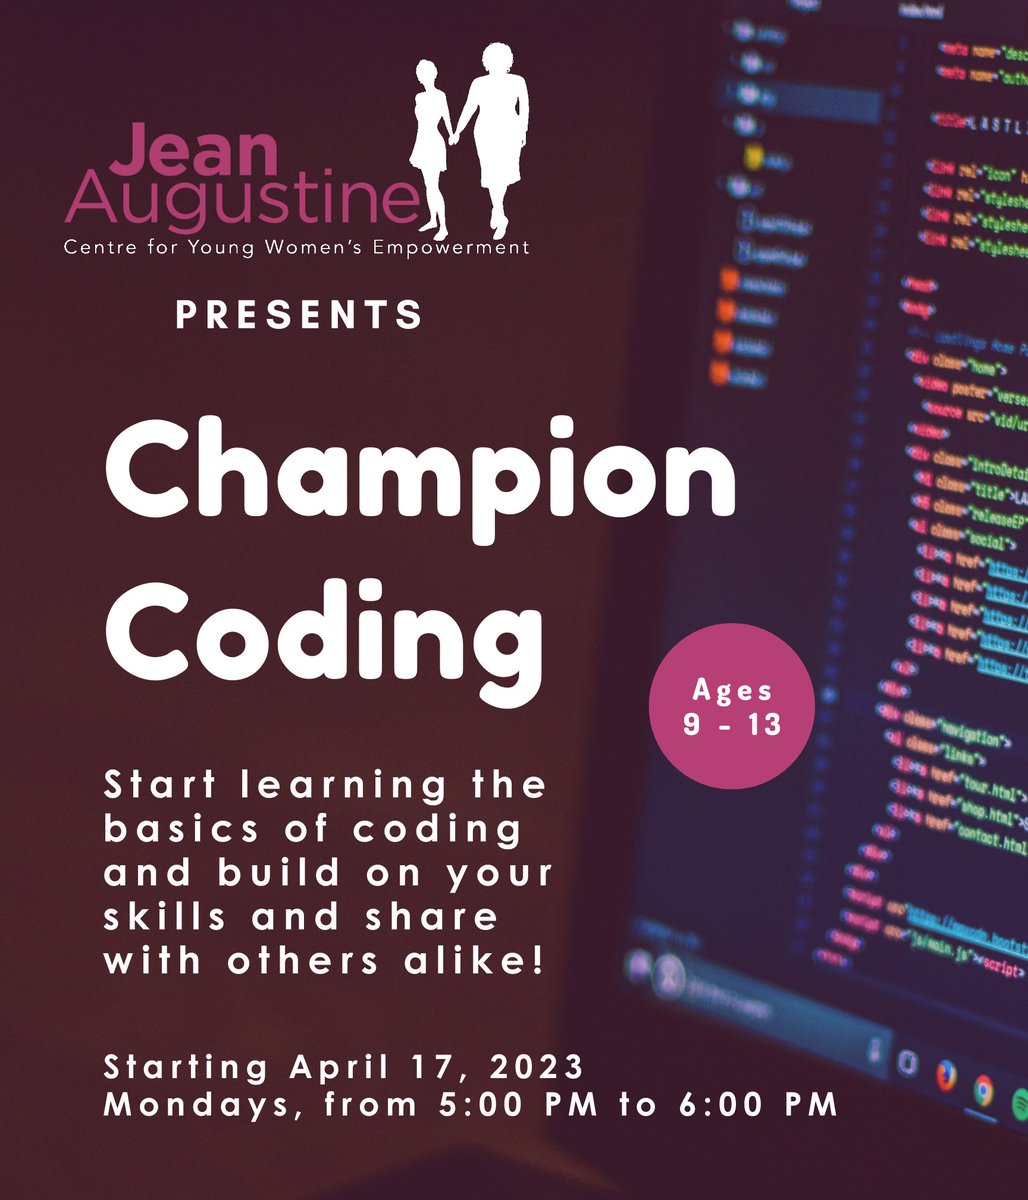 JAC is excited to announce that our virtual #coding  workshop with @thehackergals returns this month! 

On Mondays from 5-6pm starting April 17th, girls ages 9-13 can learn the basics of coding in an encouraging environment at no cost.

Register here: forms.gle/FERn23kom1spfr…